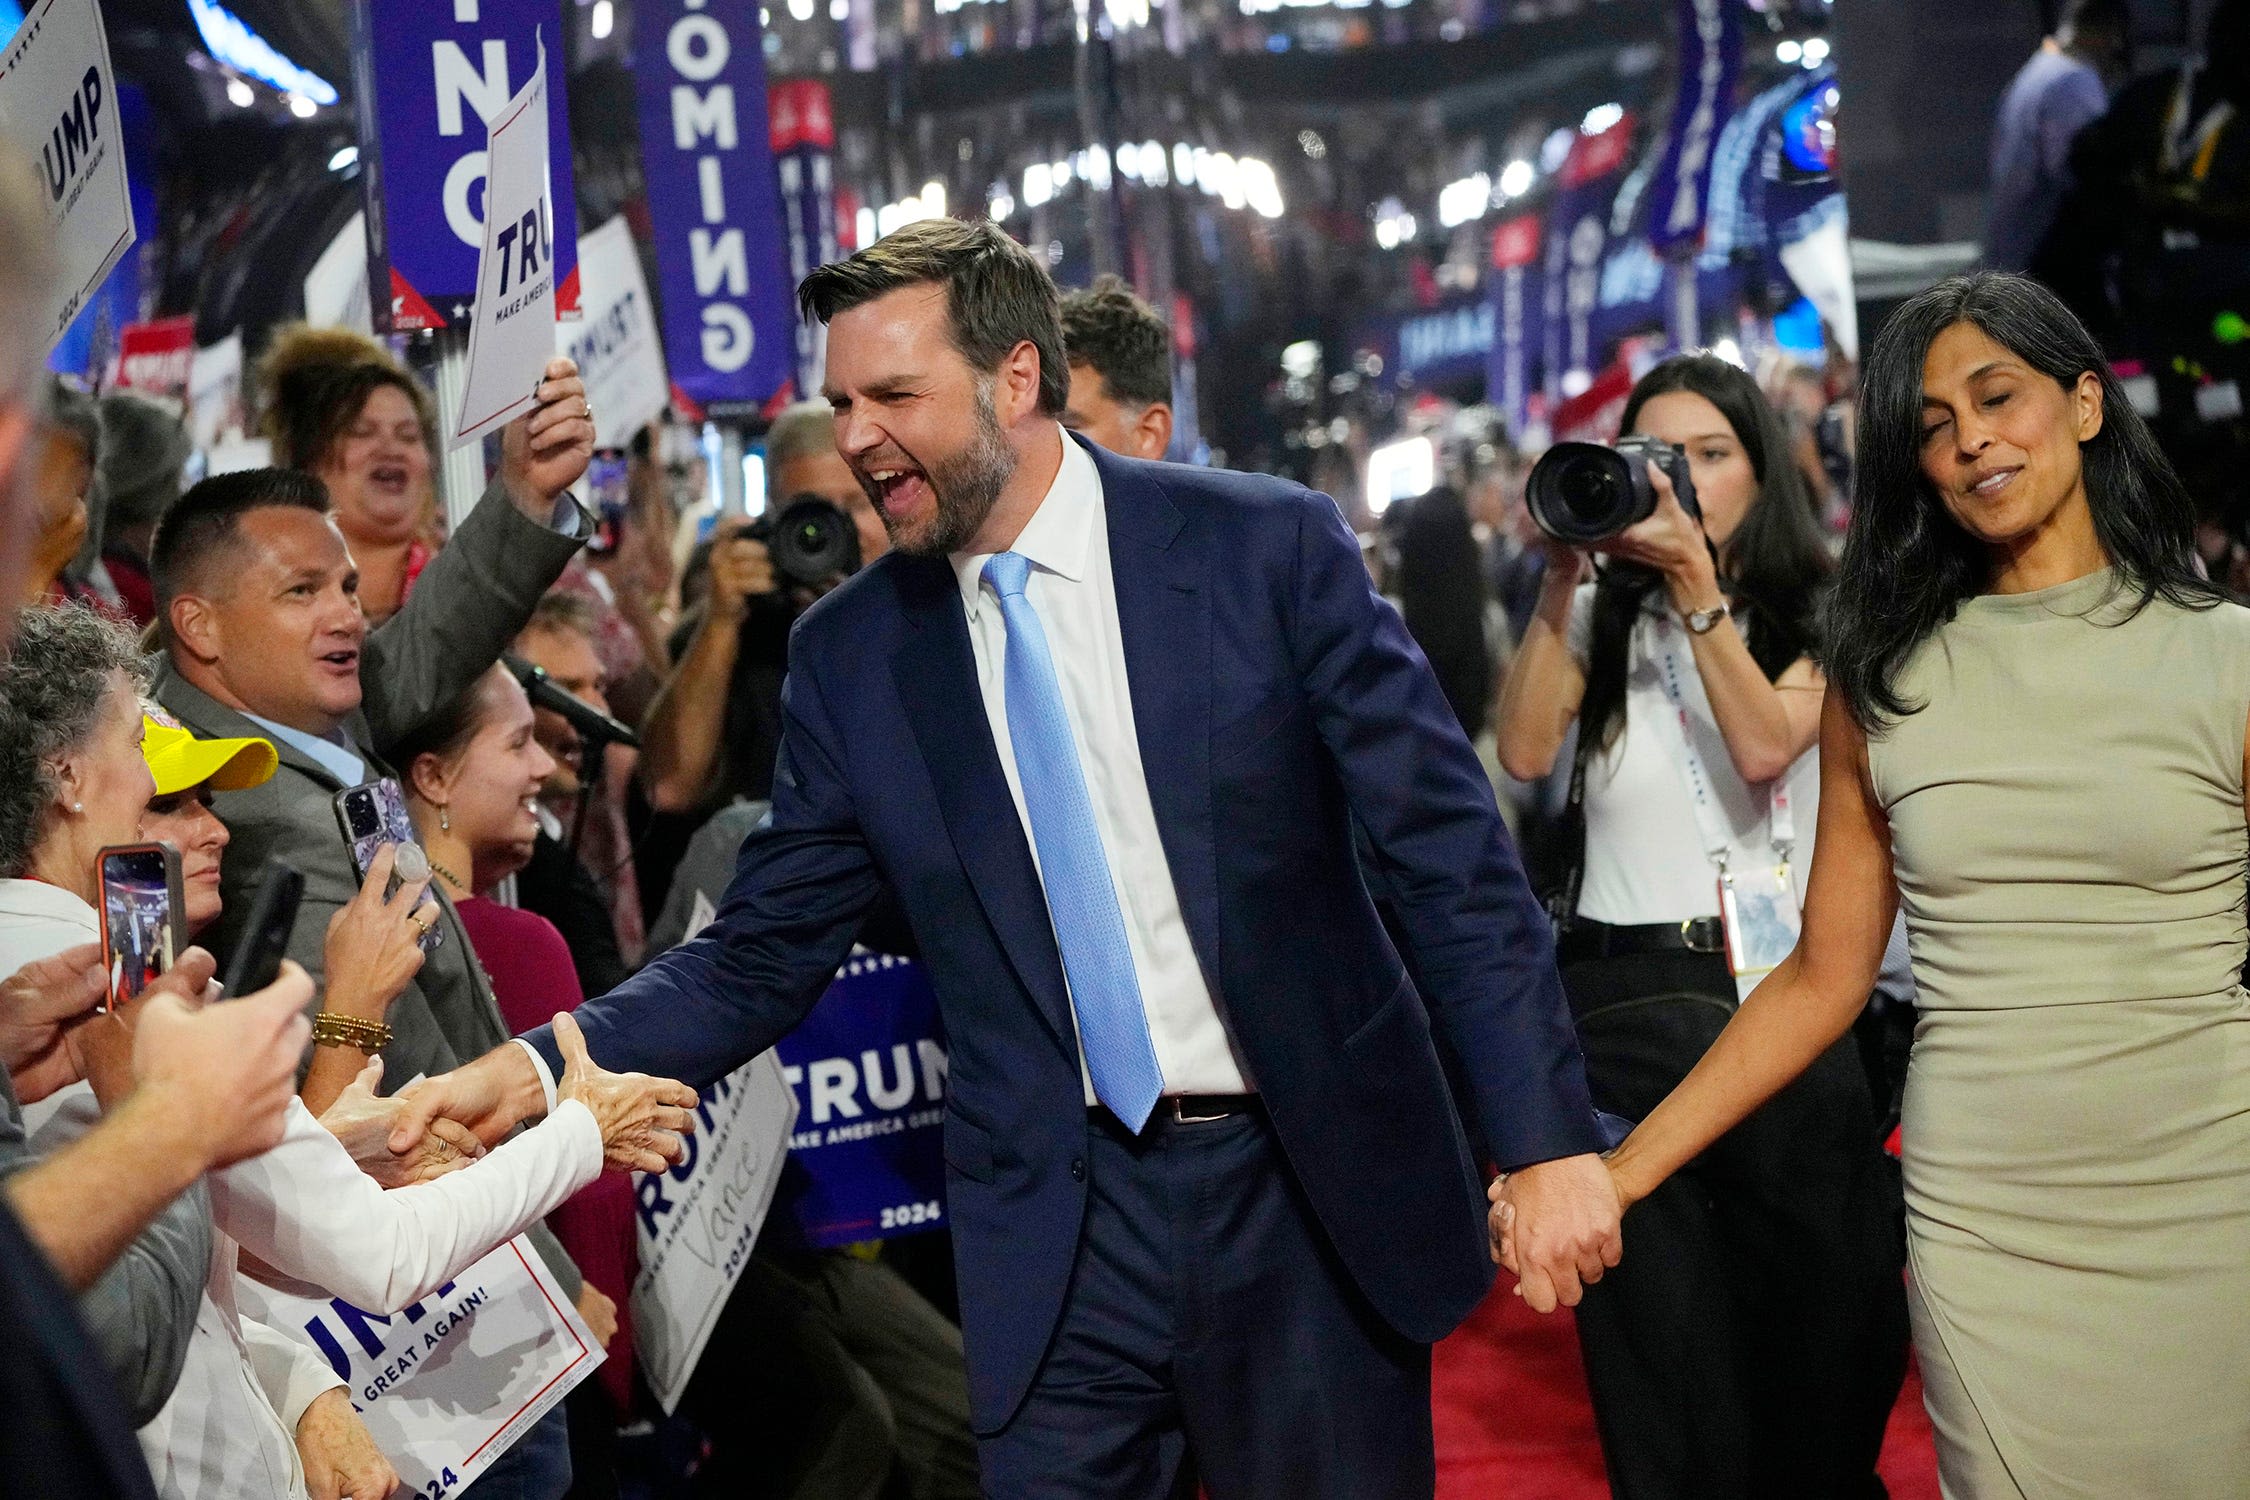 JD Vance cast doubt on 2020 election results, wouldn't have certified result